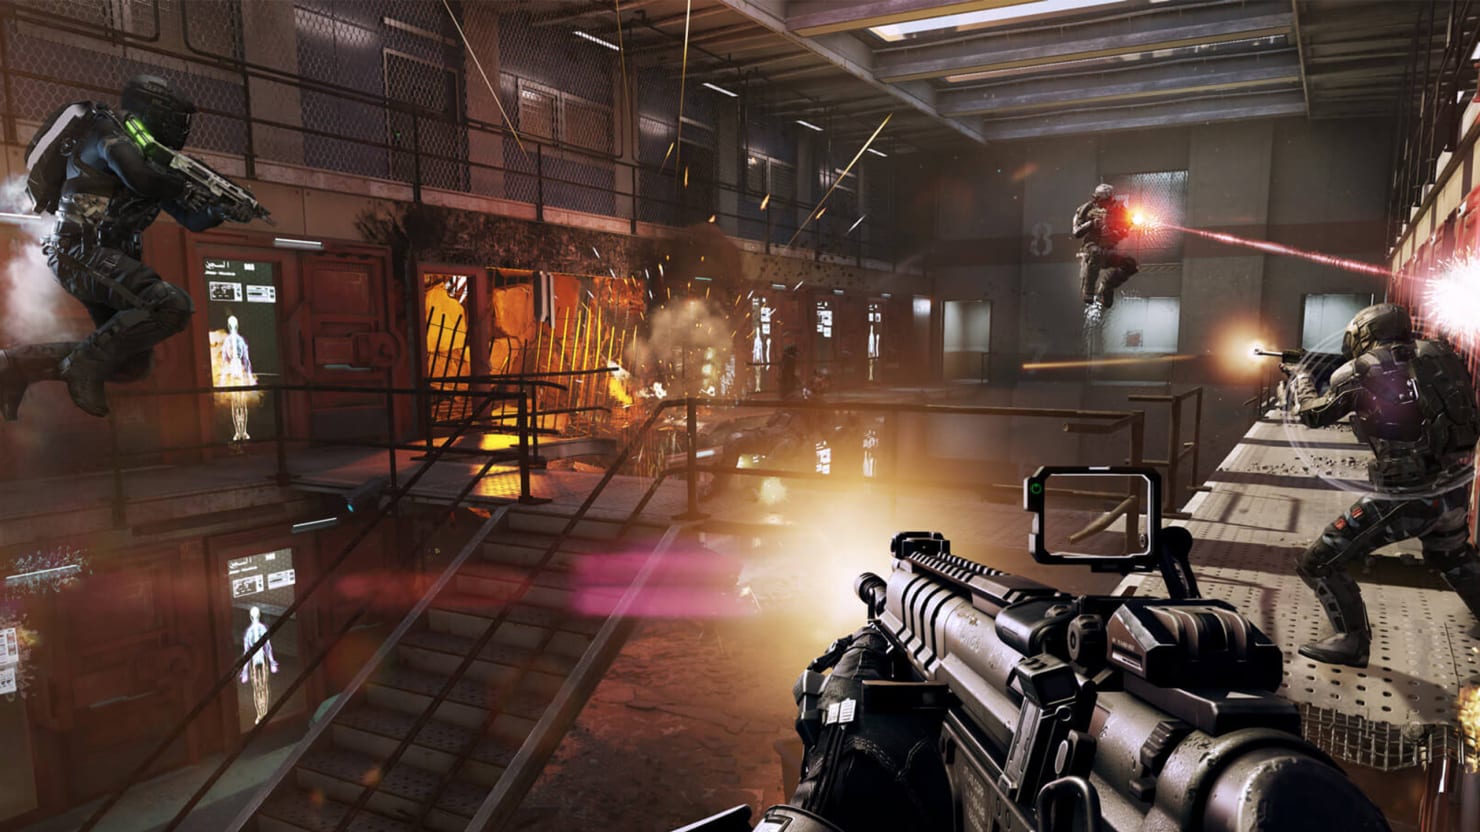 Music to Shoot You By Taking Beethoven on a Ride-Along in First-Person-Shooter Games